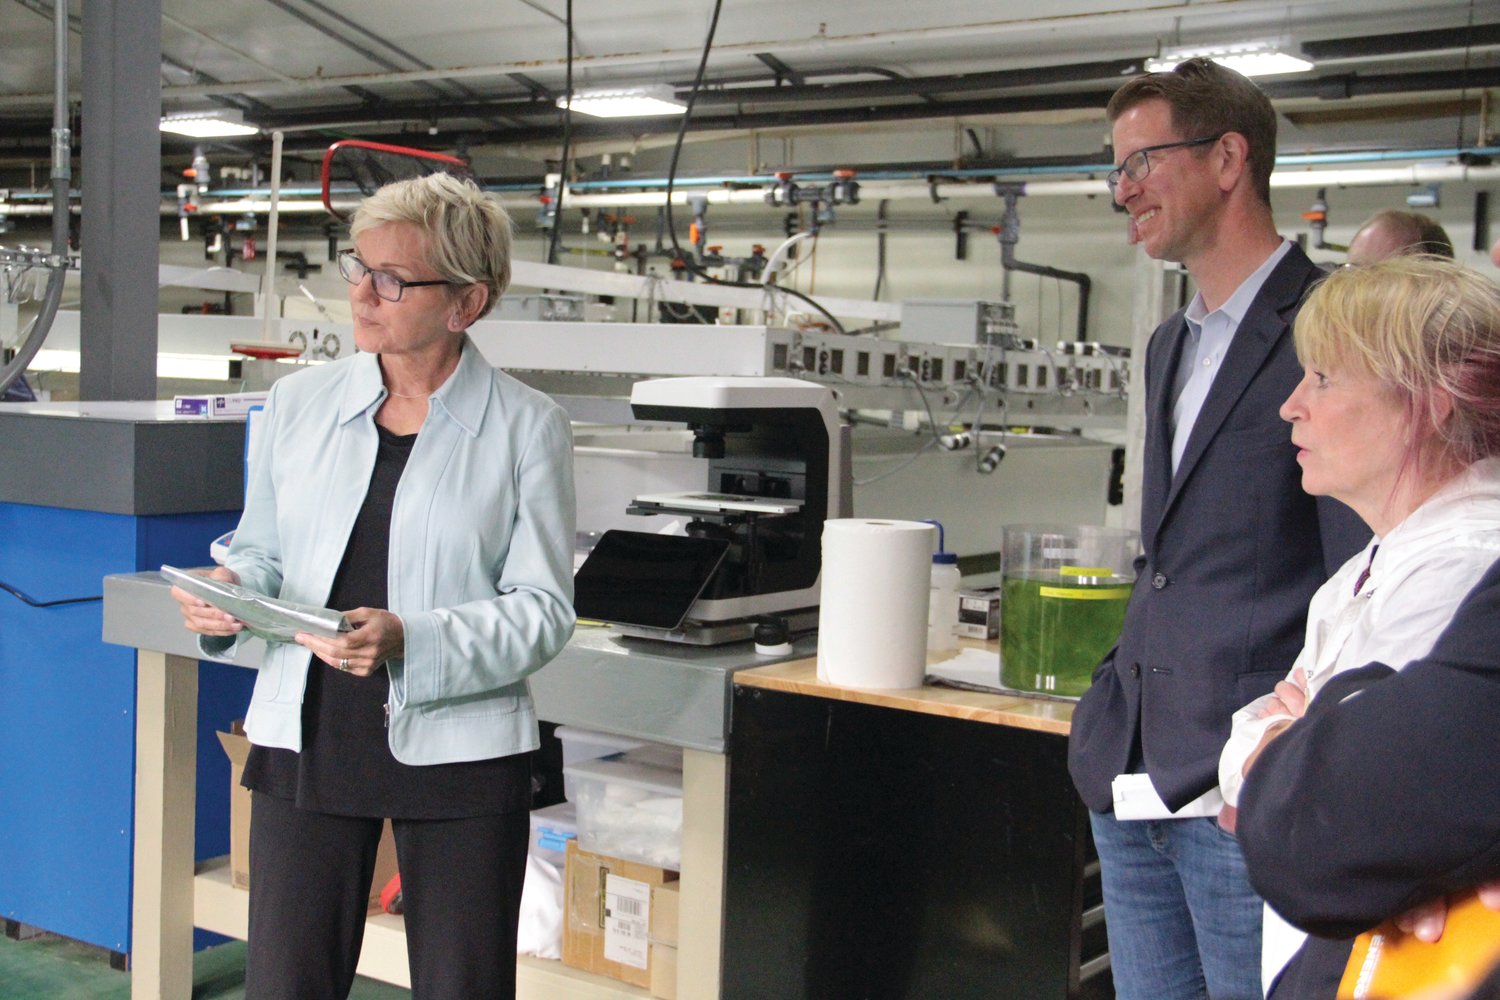 U.S. Secretary of Energy Jennifer M. Granholm talks with researchers at the Pacific Northwest National Laboratory-Sequim while touring the research facility with Congressman Derek Kilmer.